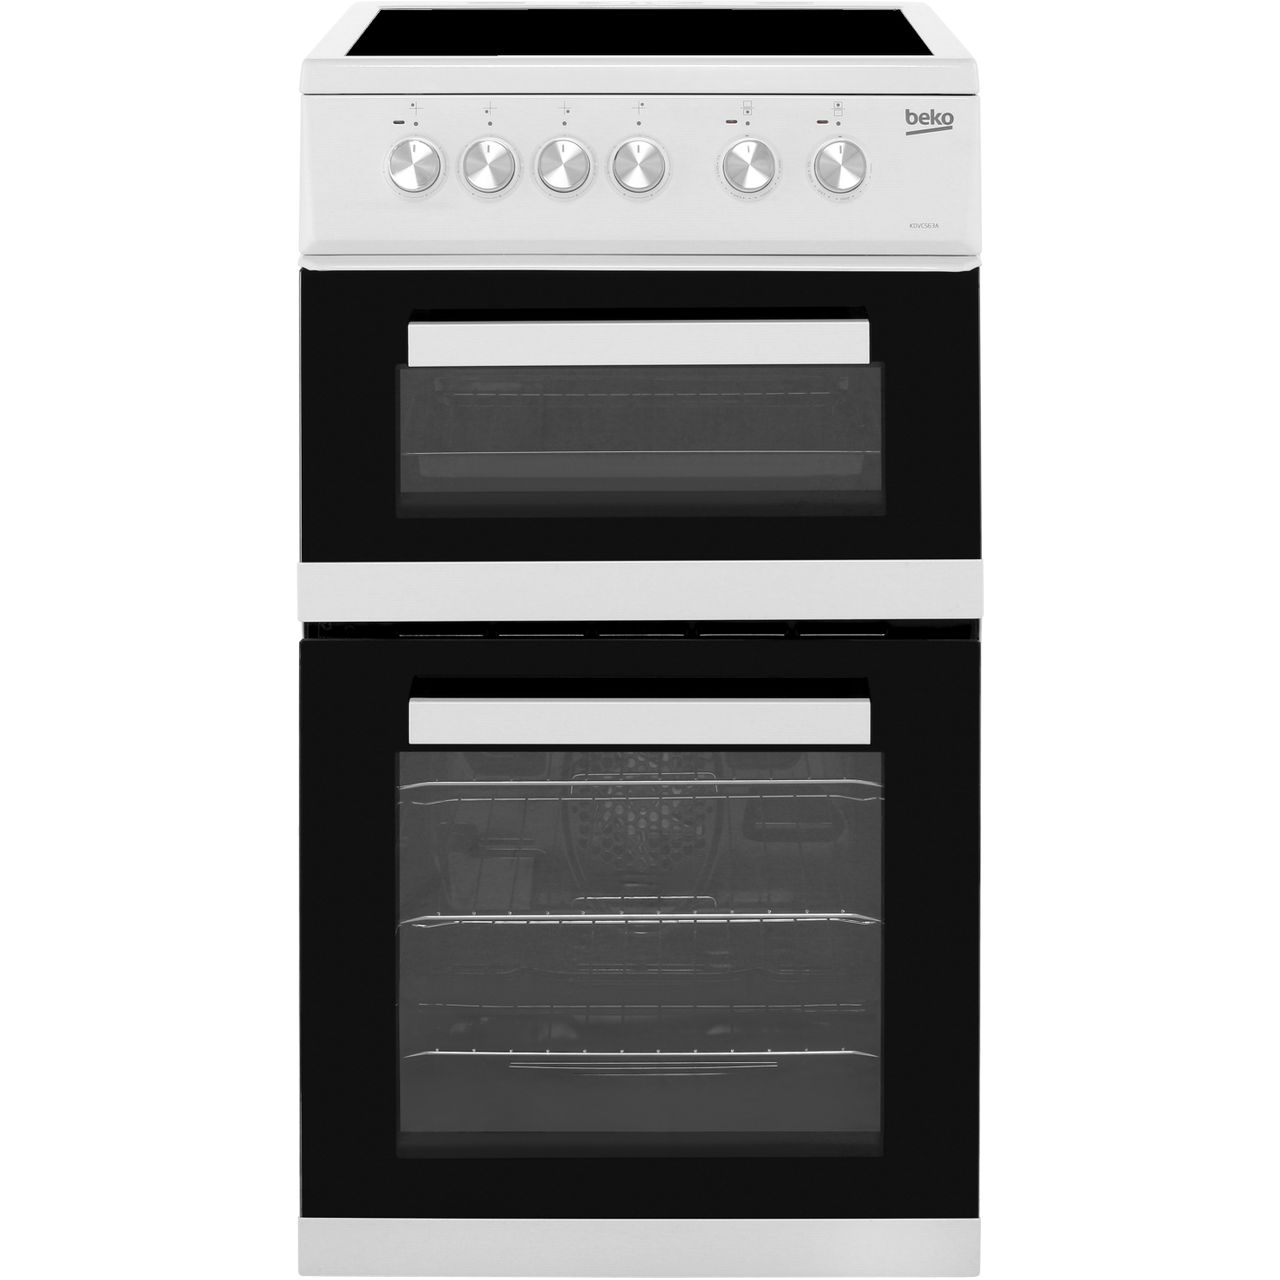 Beko KDVC563AW 50cm Electric Cooker with Ceramic Hob Review